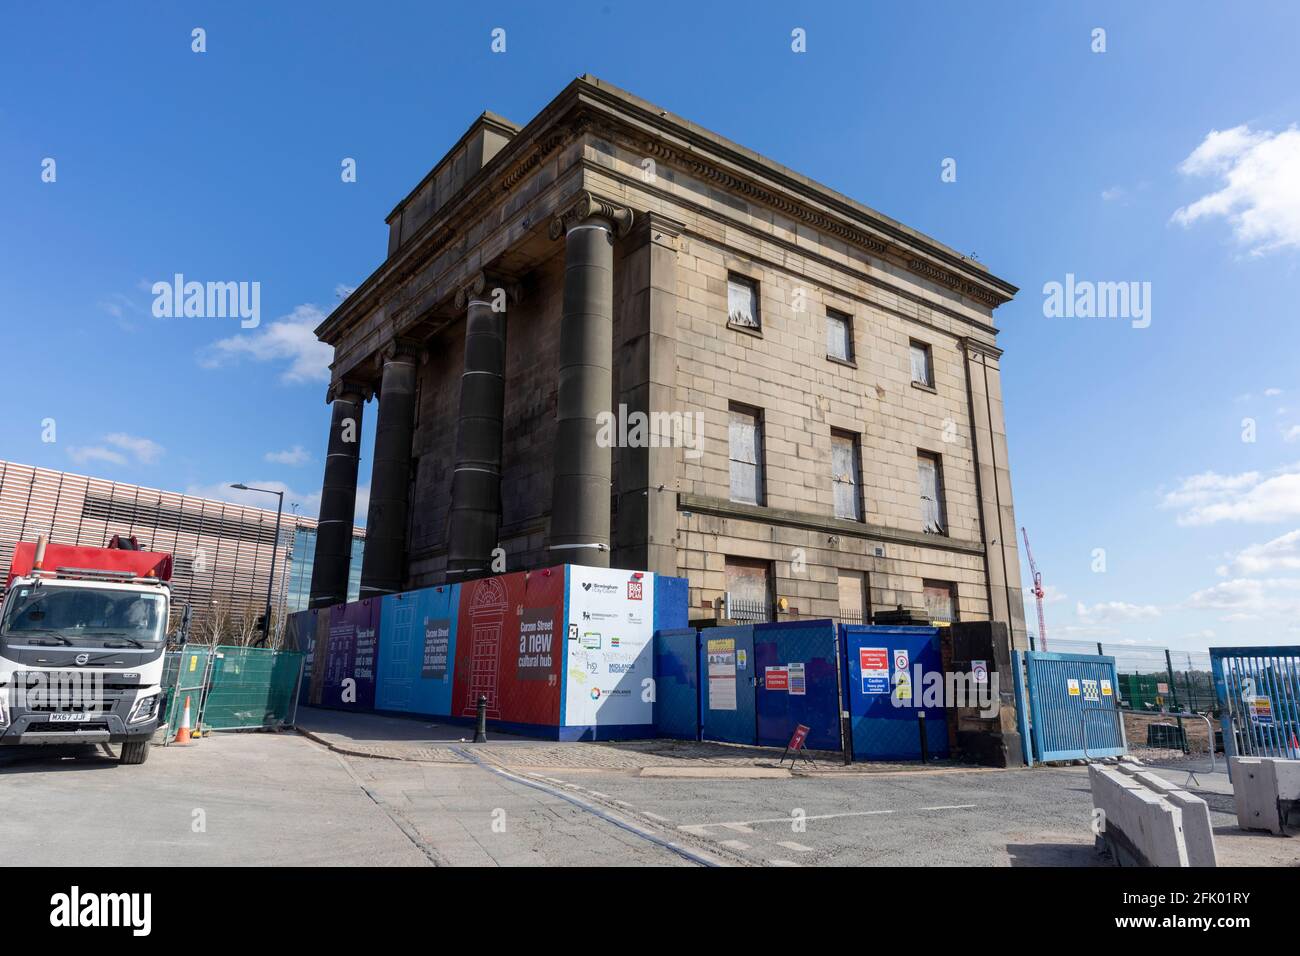 The Curzon Street station building, which will be the HS2 station in Birmingham, UK. The Millennium Point building is behind. Stock Photo